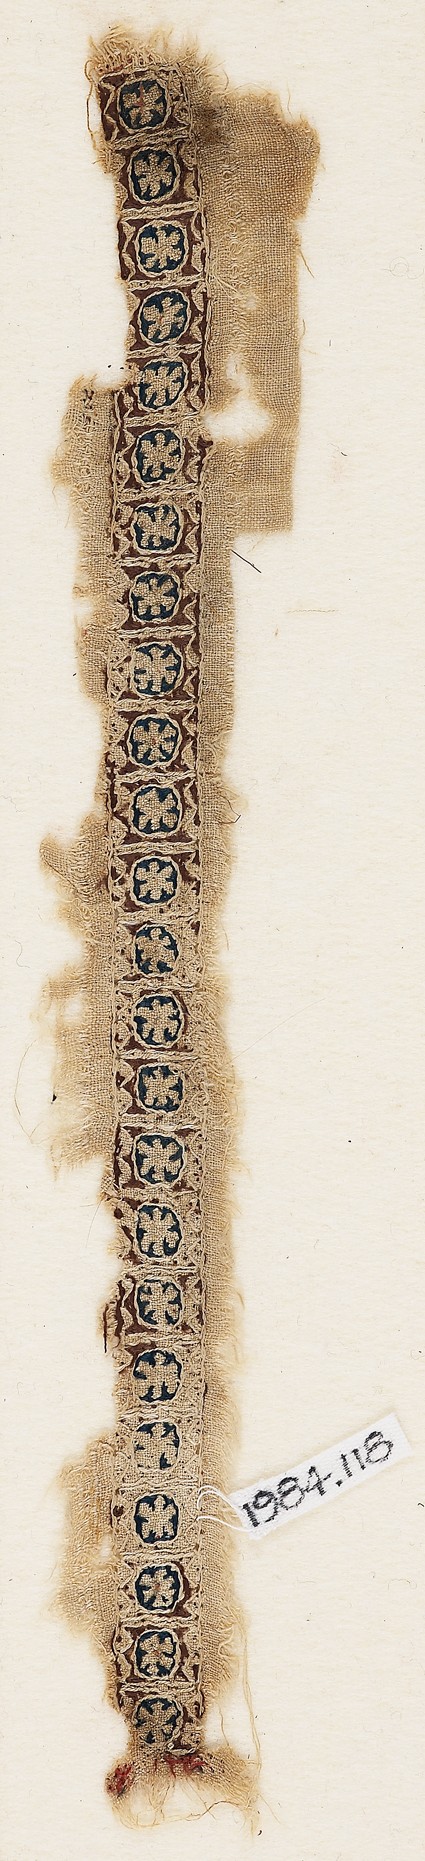 Textile fragment with circles and rosettesfront